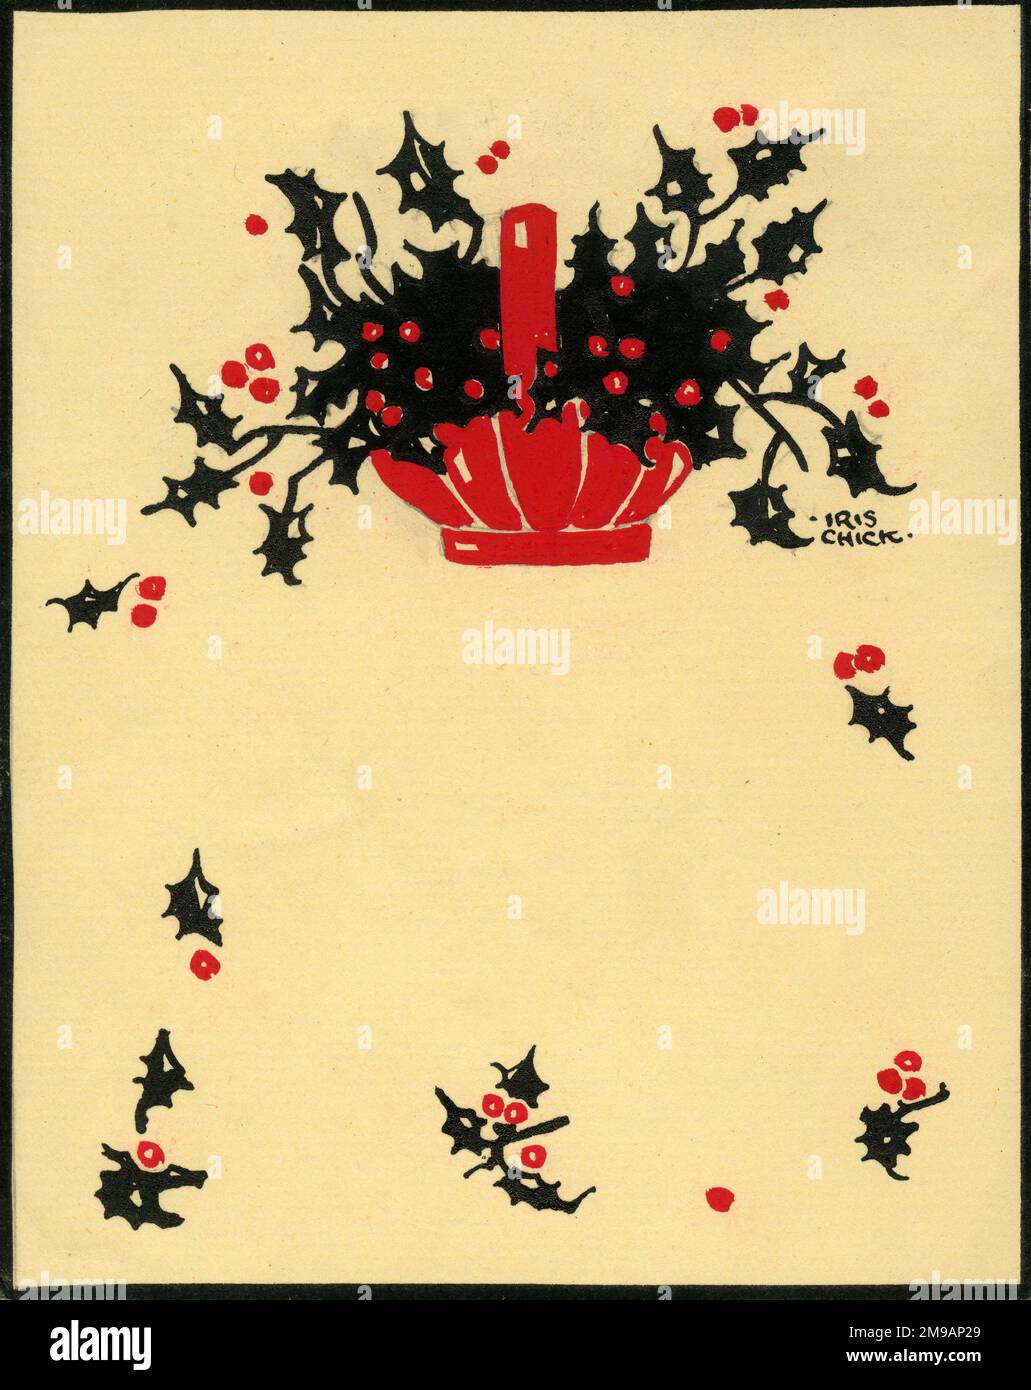 Original Artwork - Design for a Christmas card - overflowing basket of holly. Stock Photo